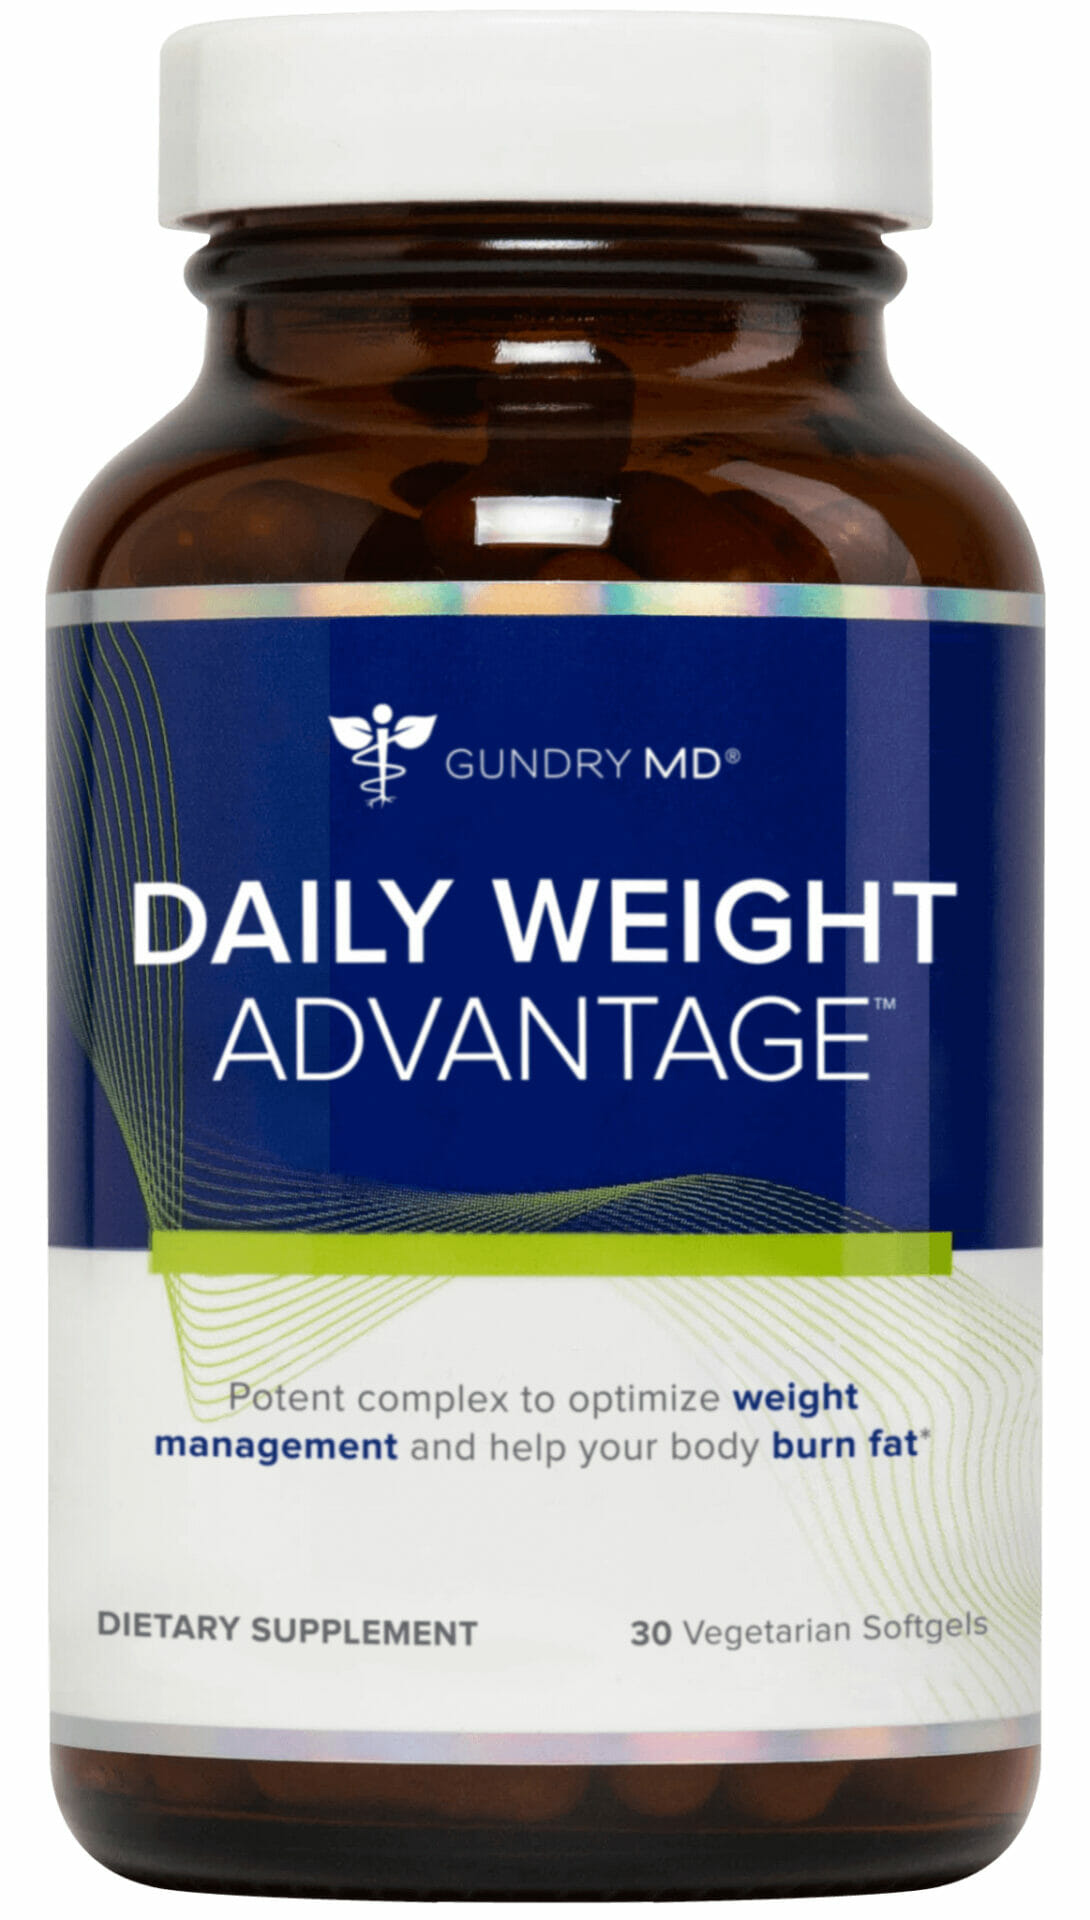 Gundry MD Daily Weight Advantage Image